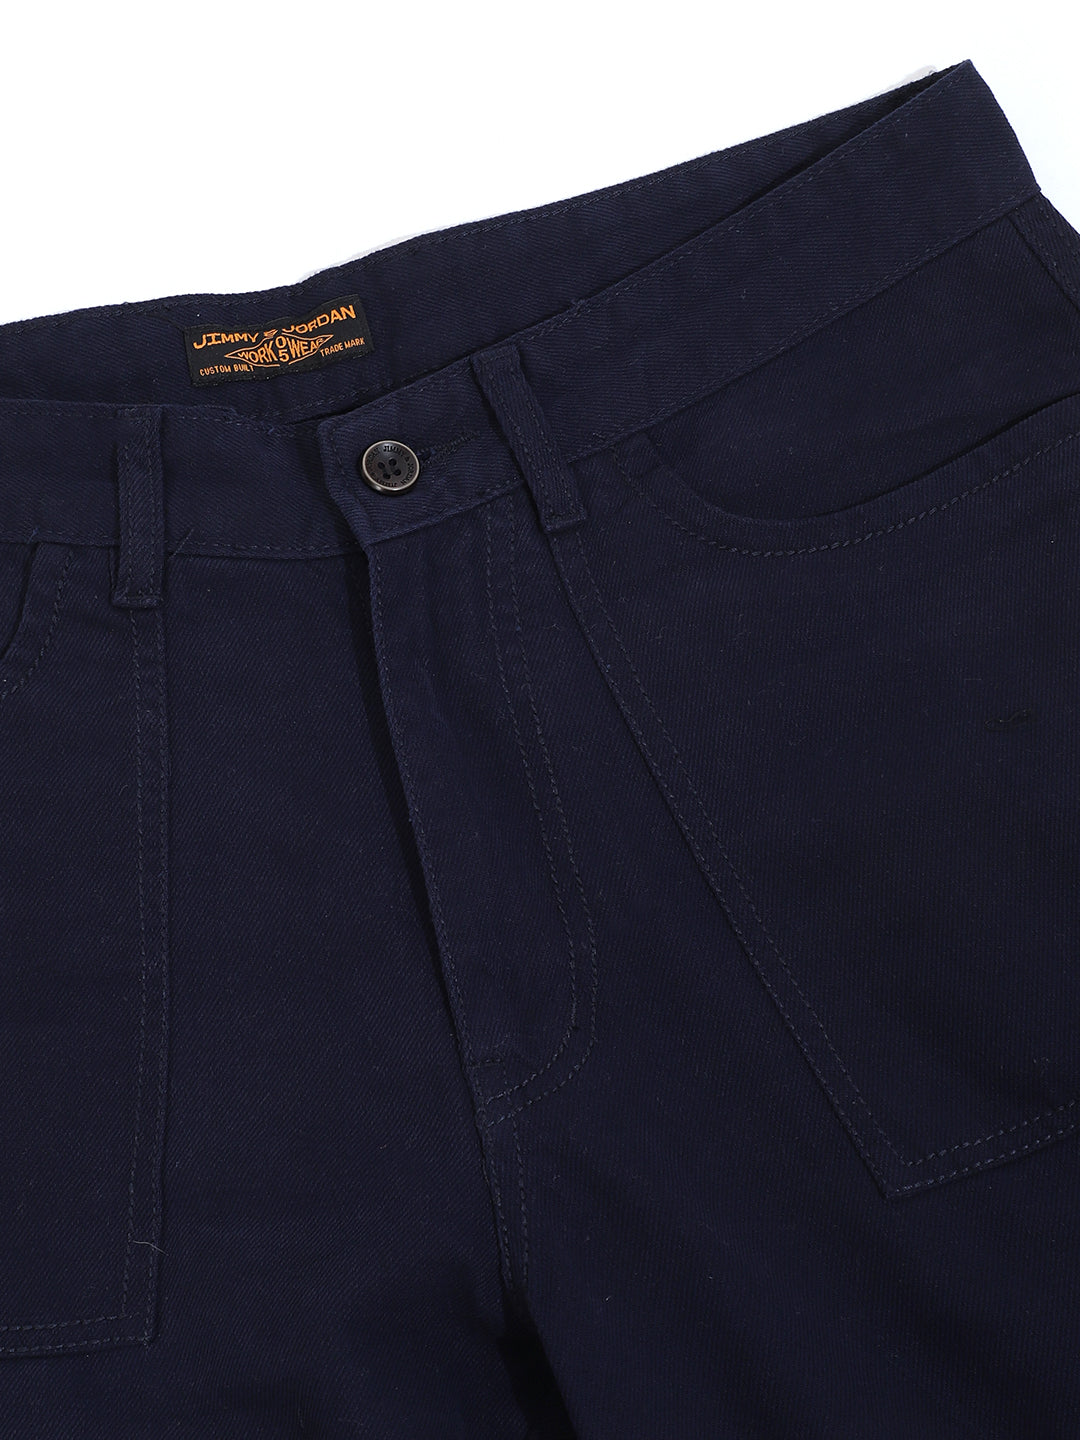 Navy Cotton Twill Baggy Fit Cargo